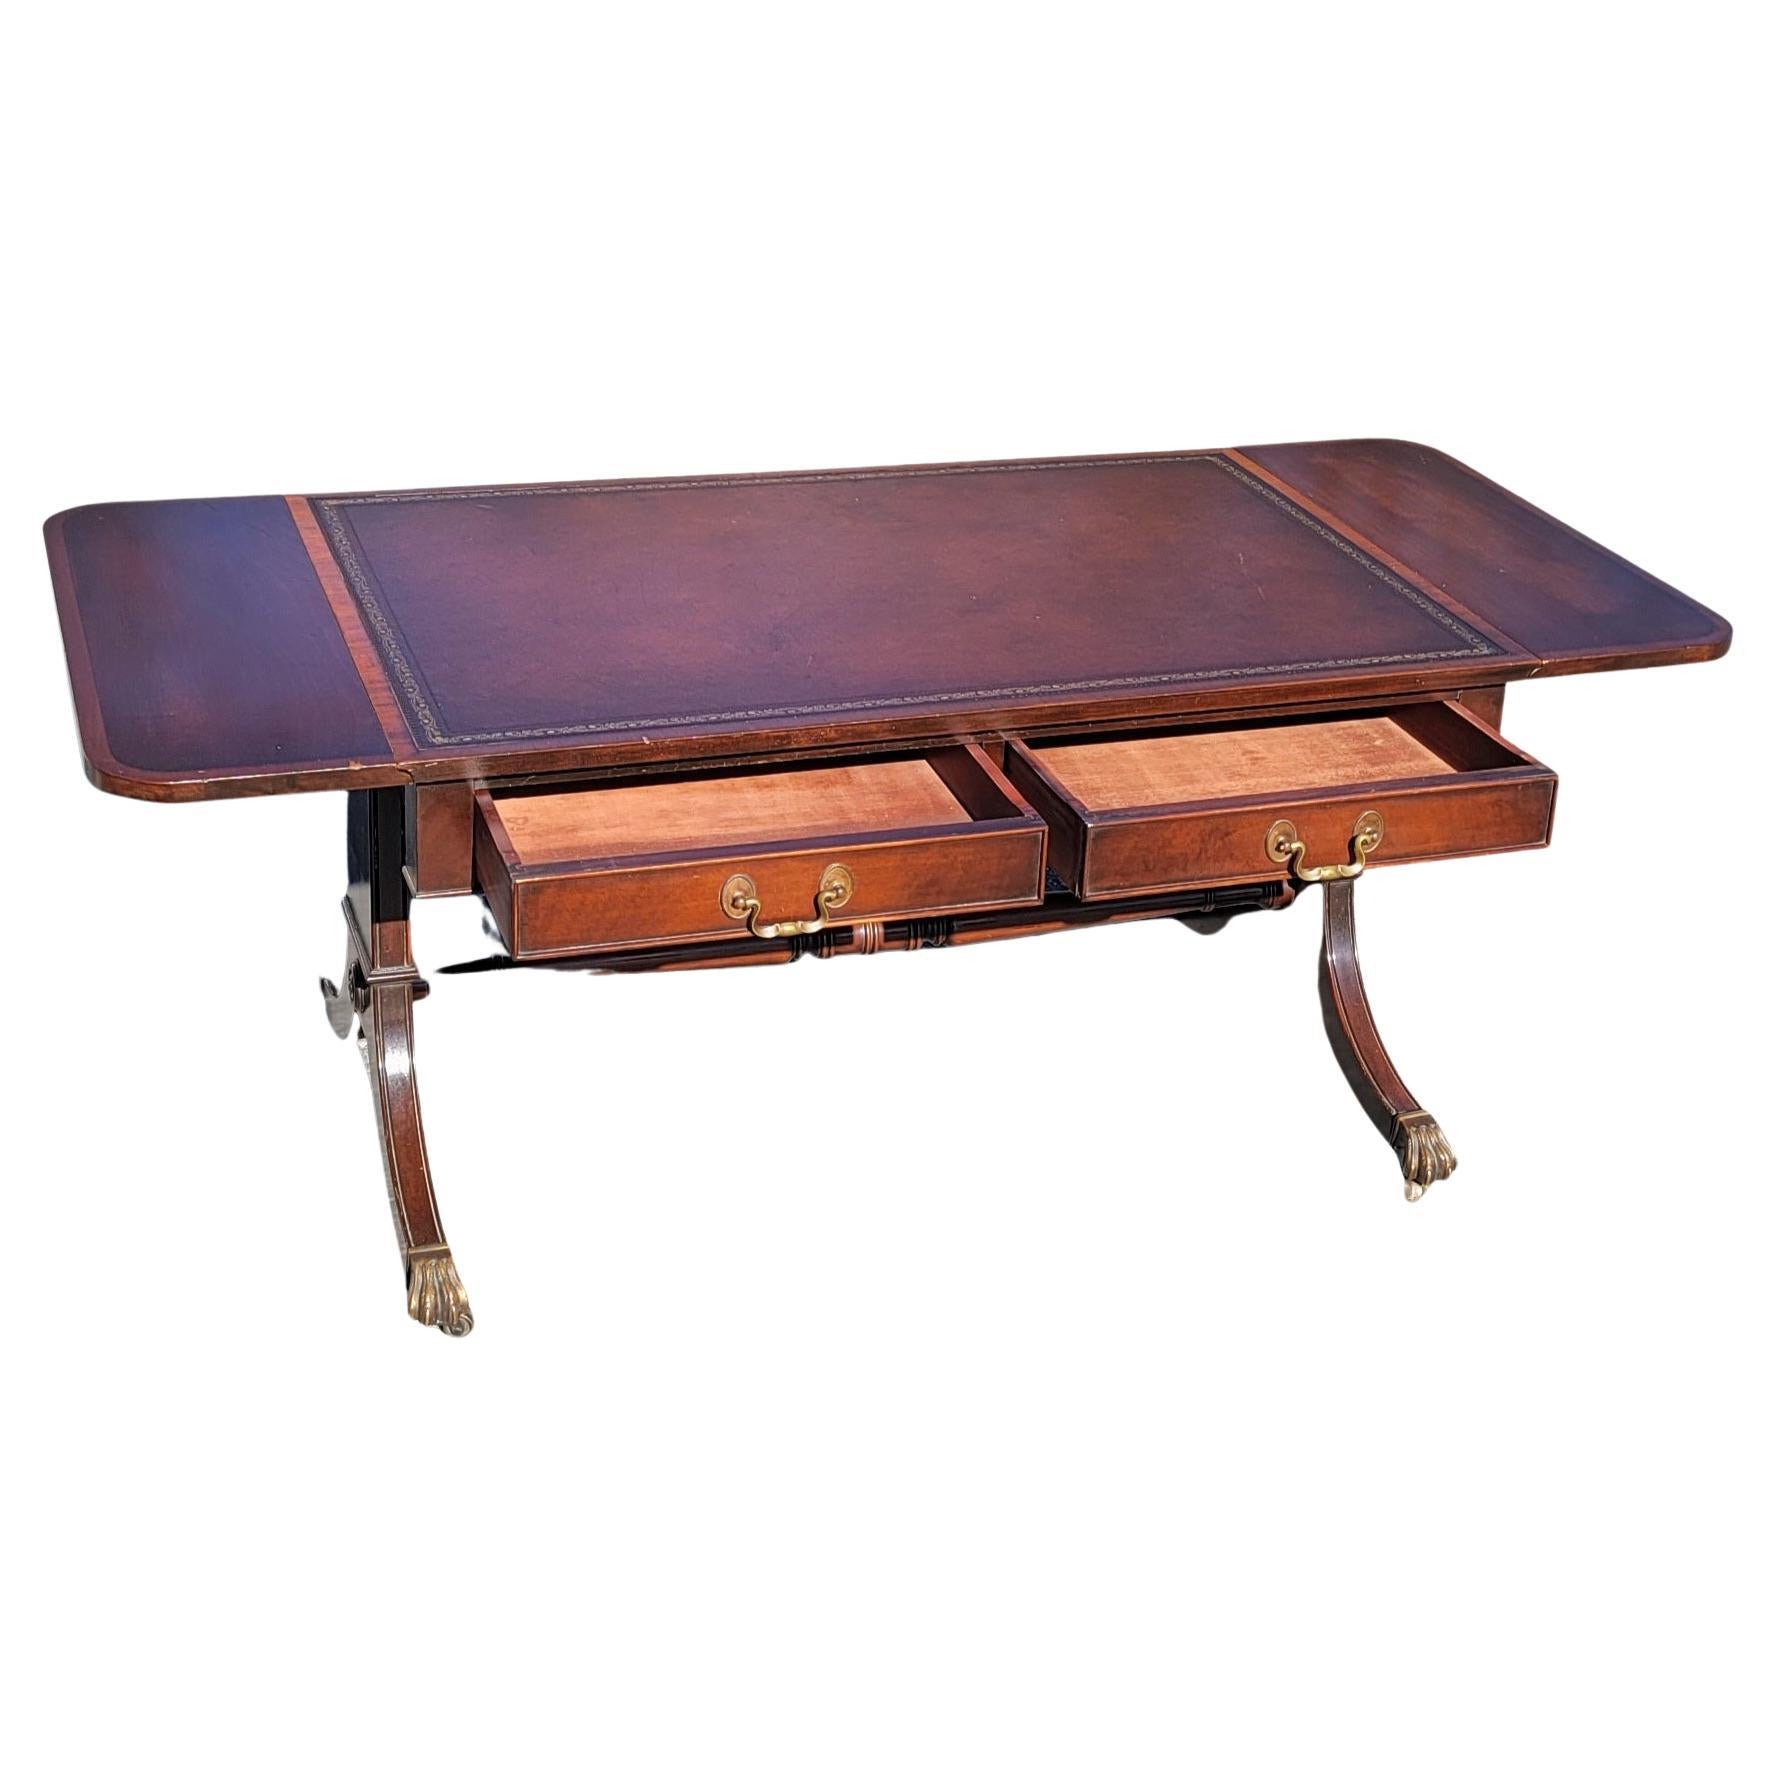 Woodwork George III Style Mahogany and Leather Top Inset Drop Leaf Coffee Table on Wheels